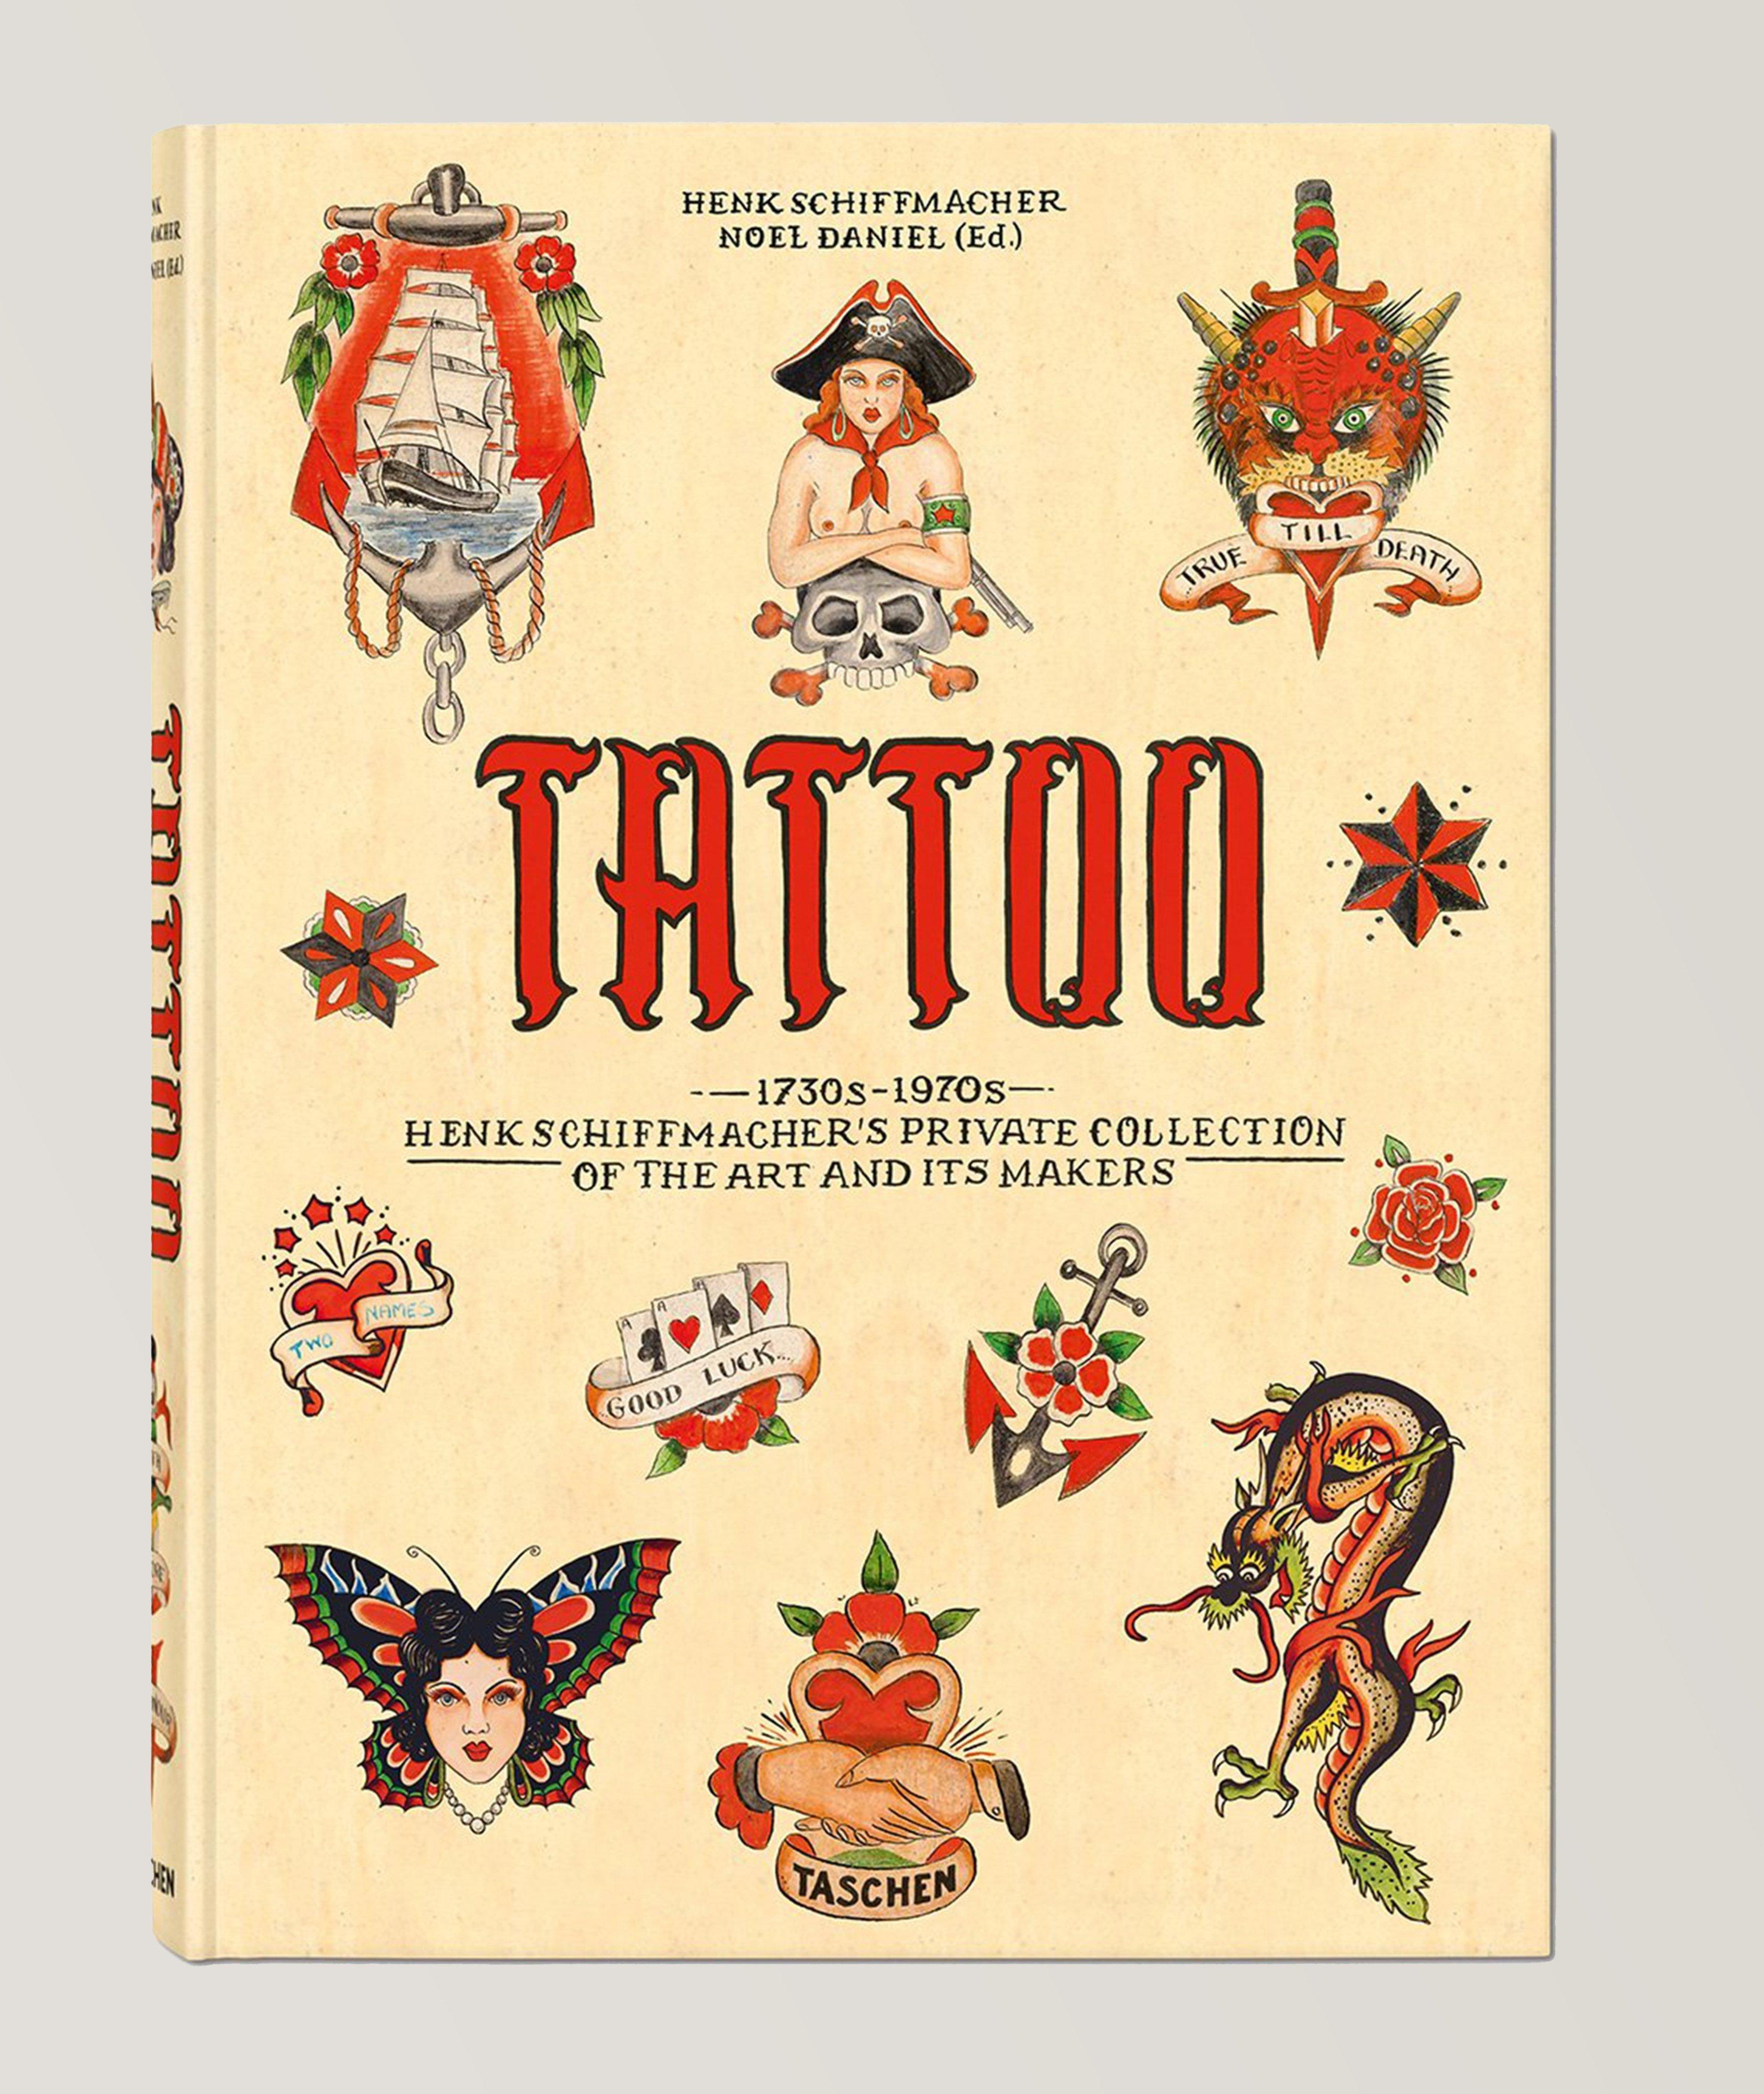 Livre « Tattoo : Henk Schiffmacher’s Private Collection » image 0